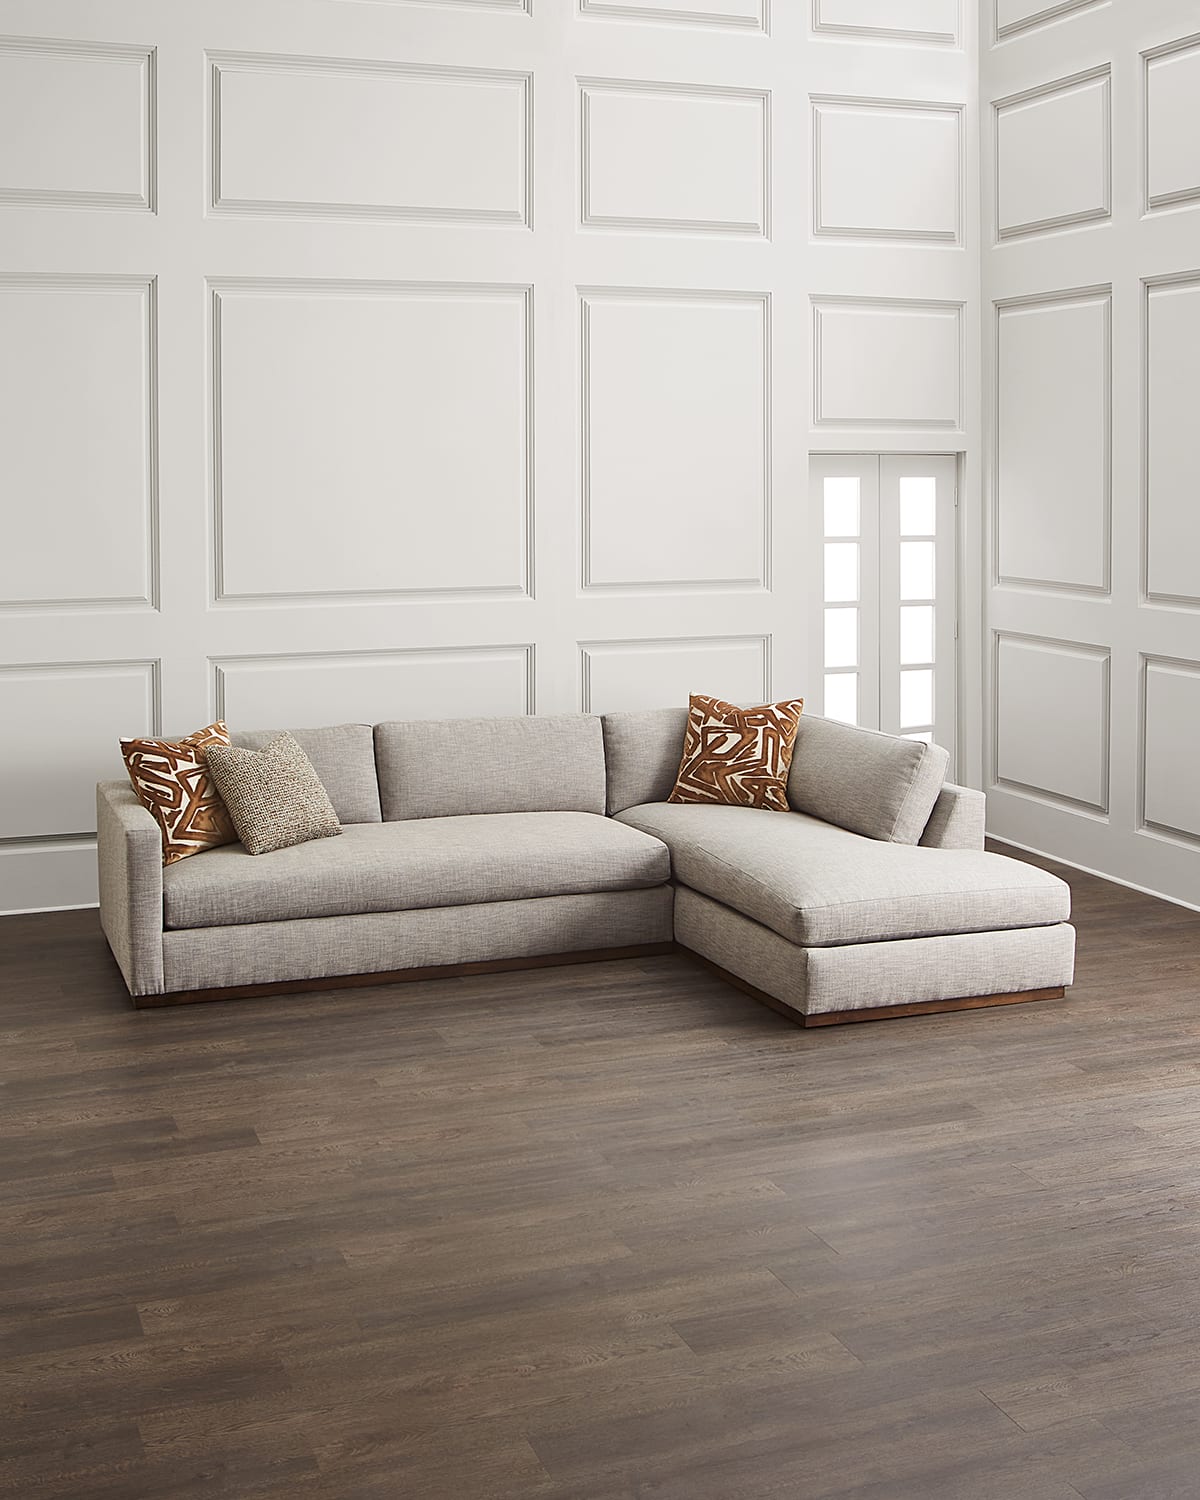 Crewsen Chaise Sectional